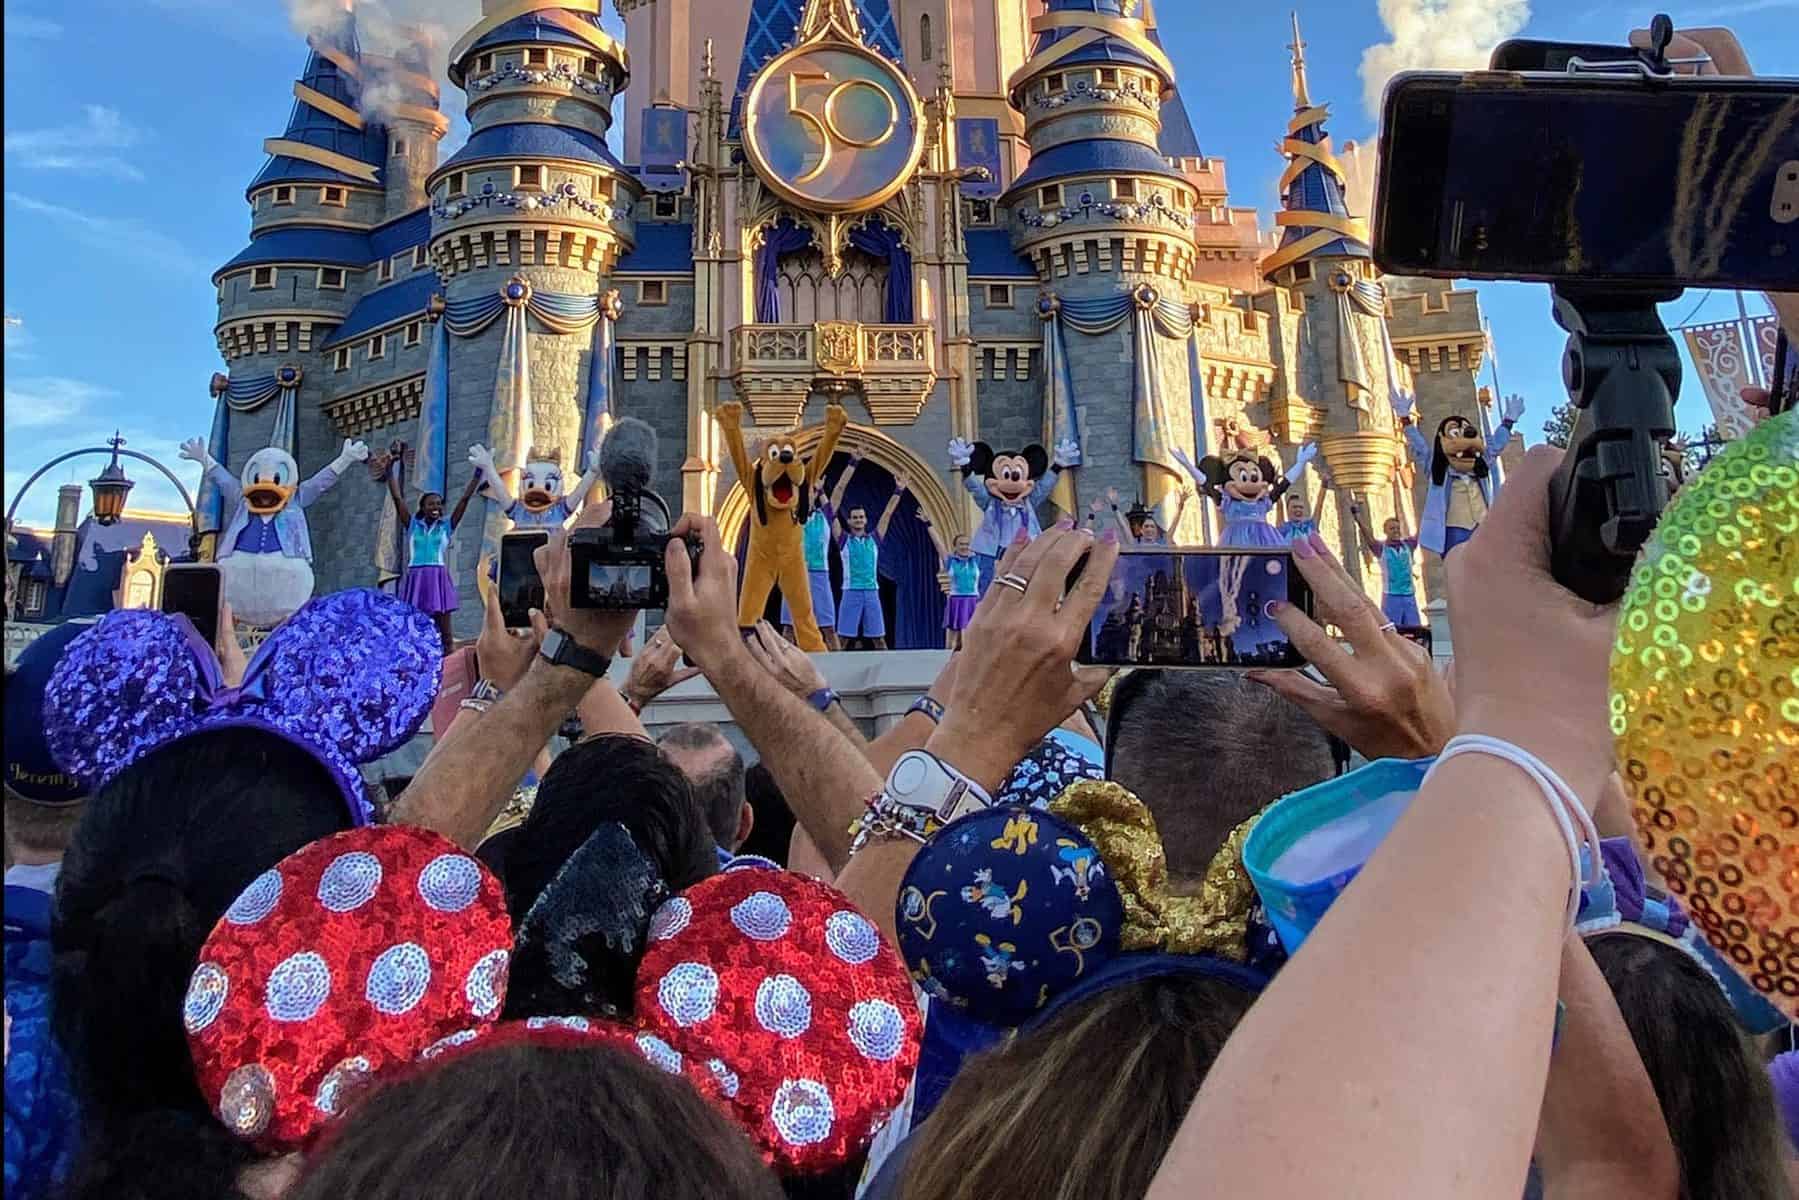 11 tips for handling the crowds at Disney World